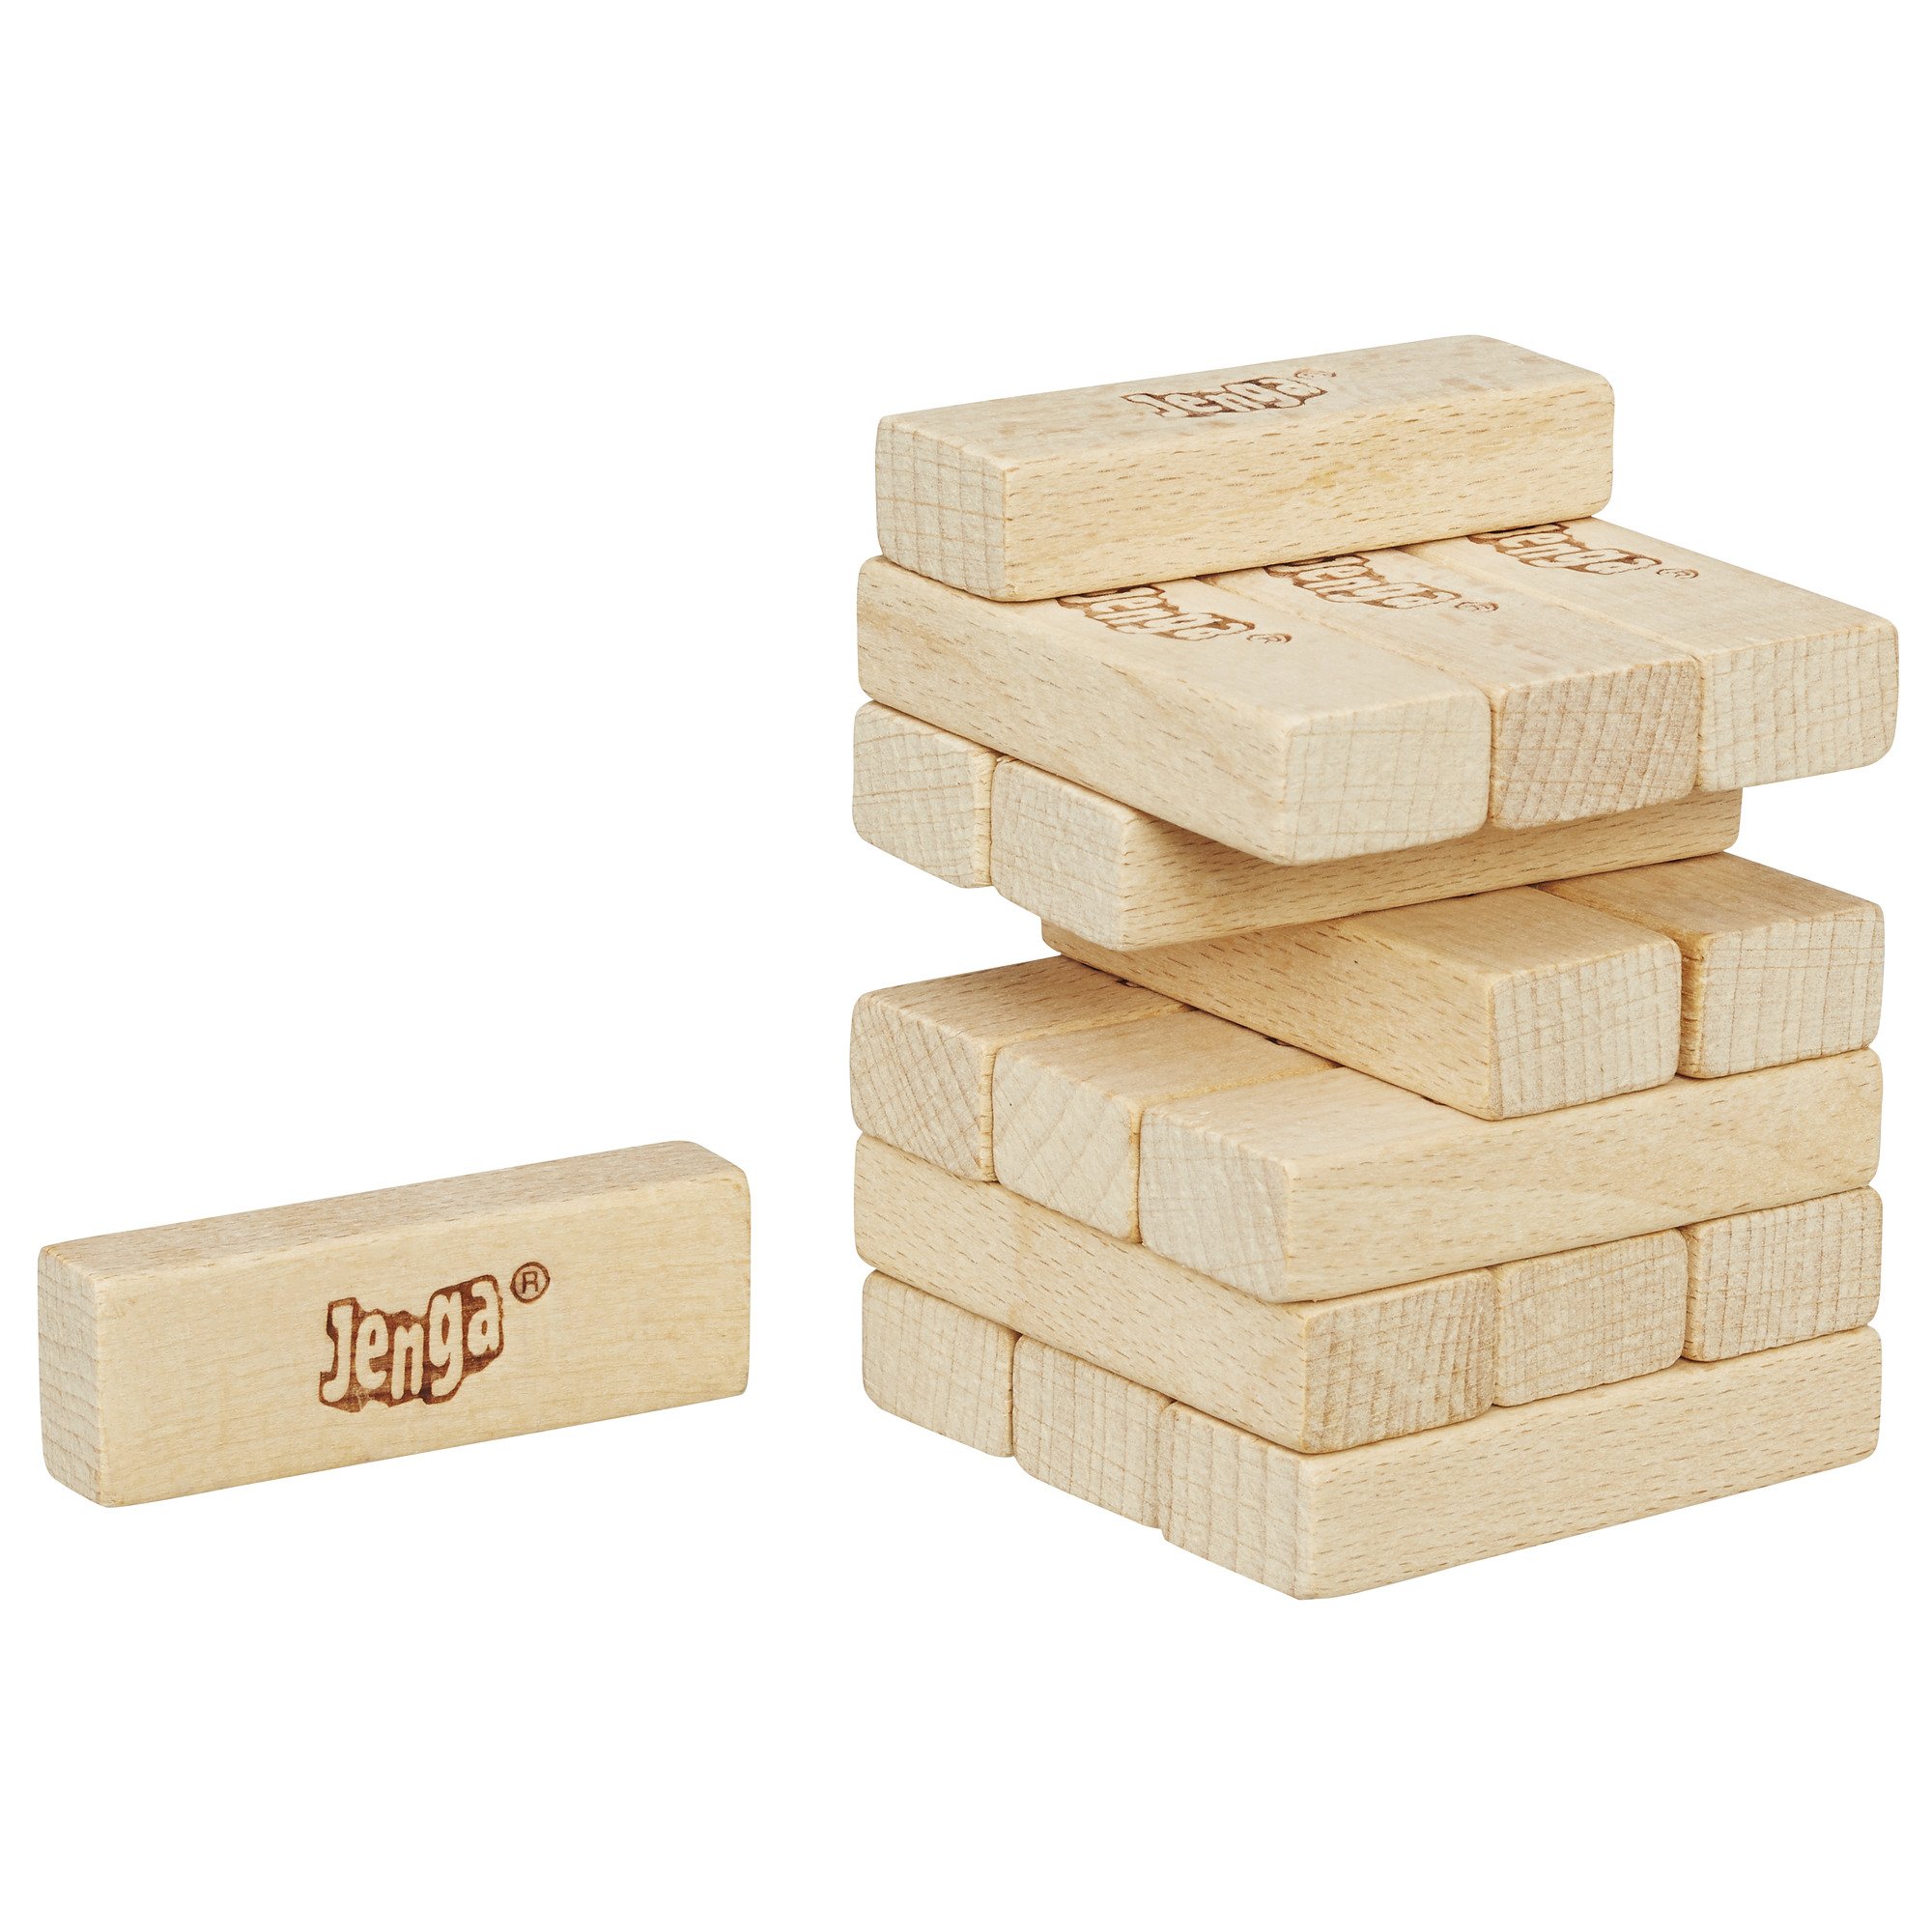 Hasbro Gaming Jenga Mini Game, Brown/a, for Ages 6+ Years